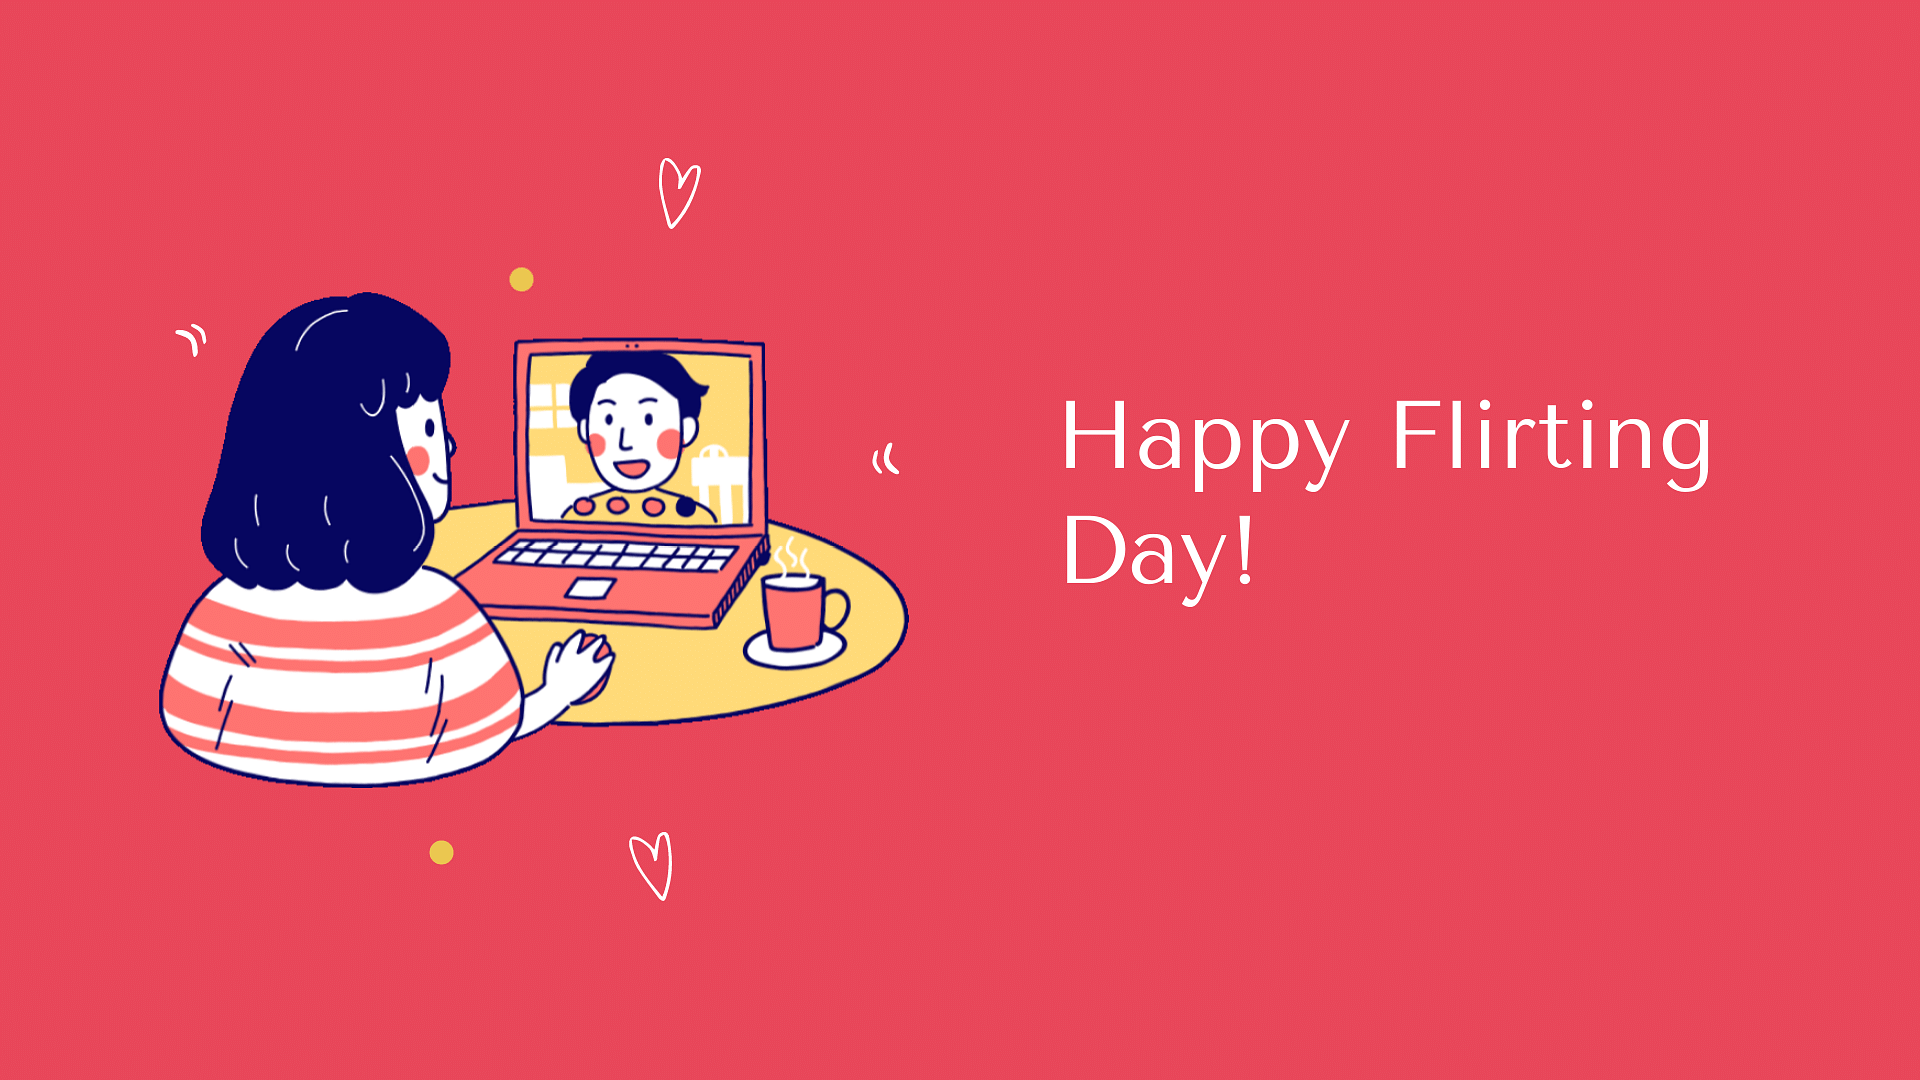 Happy Flirting Day : Images, Wishes and Quotes  